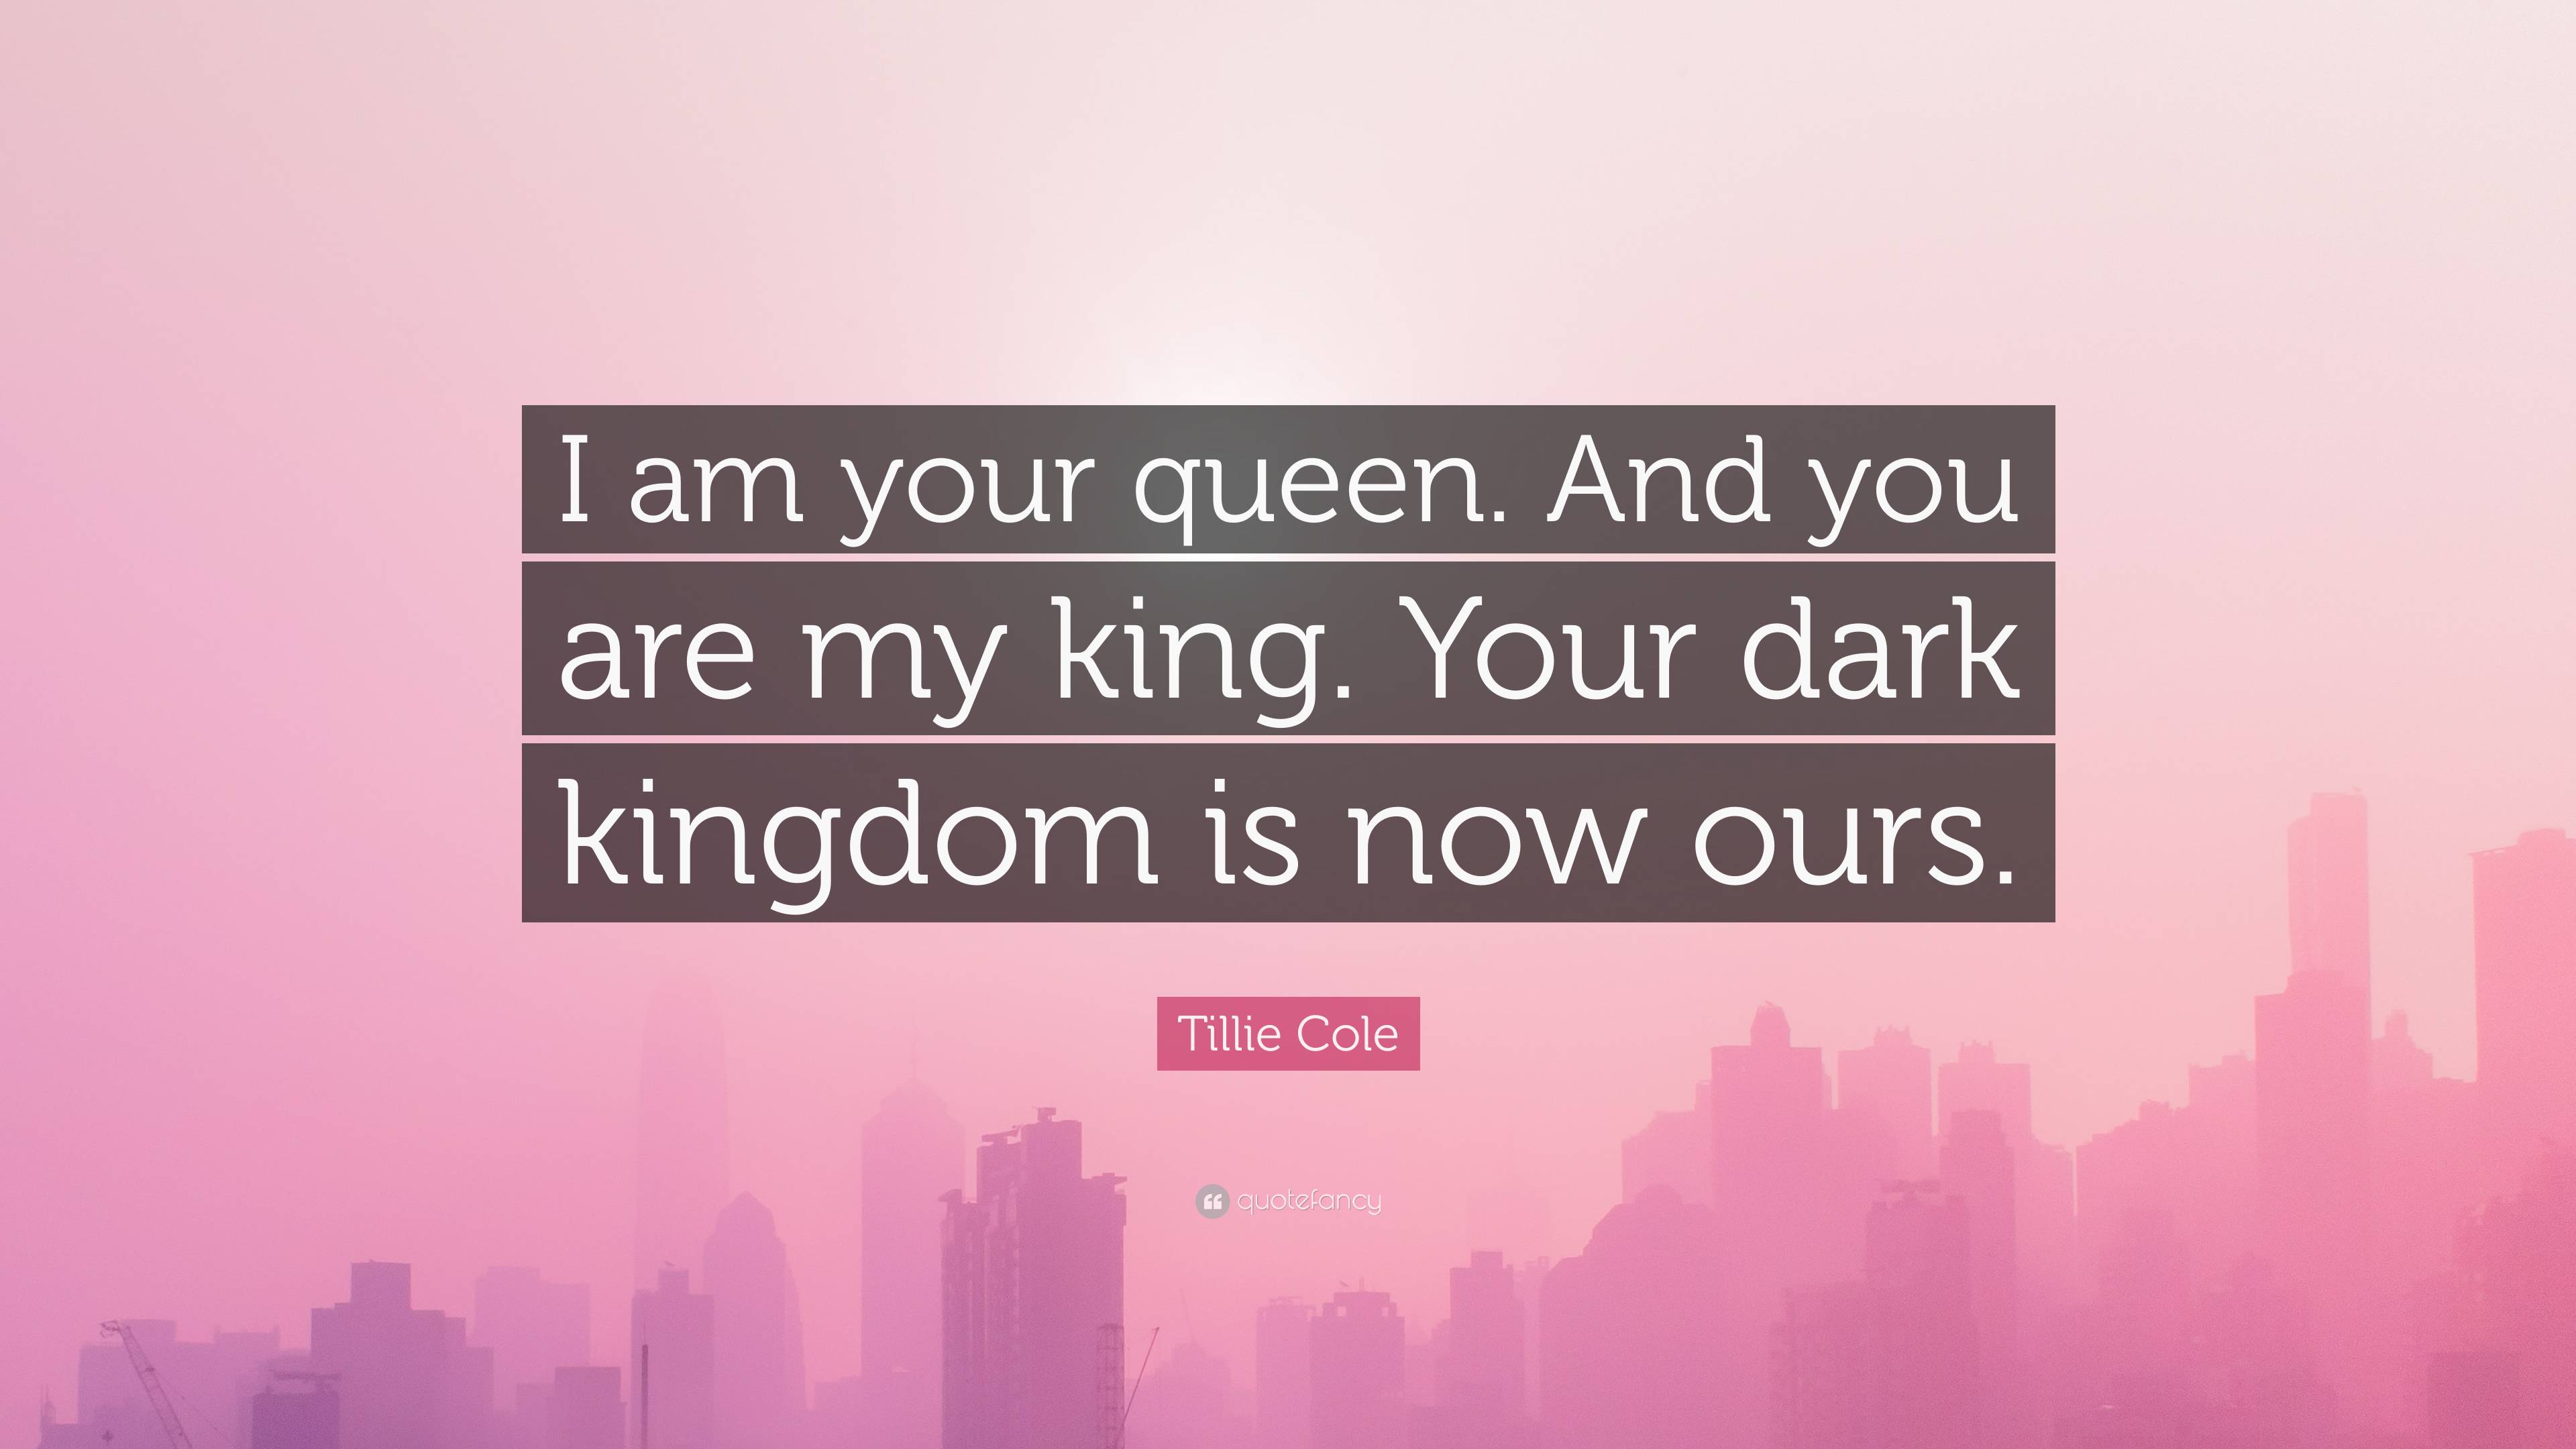 Tillie Cole Quote: “I am is kingdom Your dark queen. are And my your you king